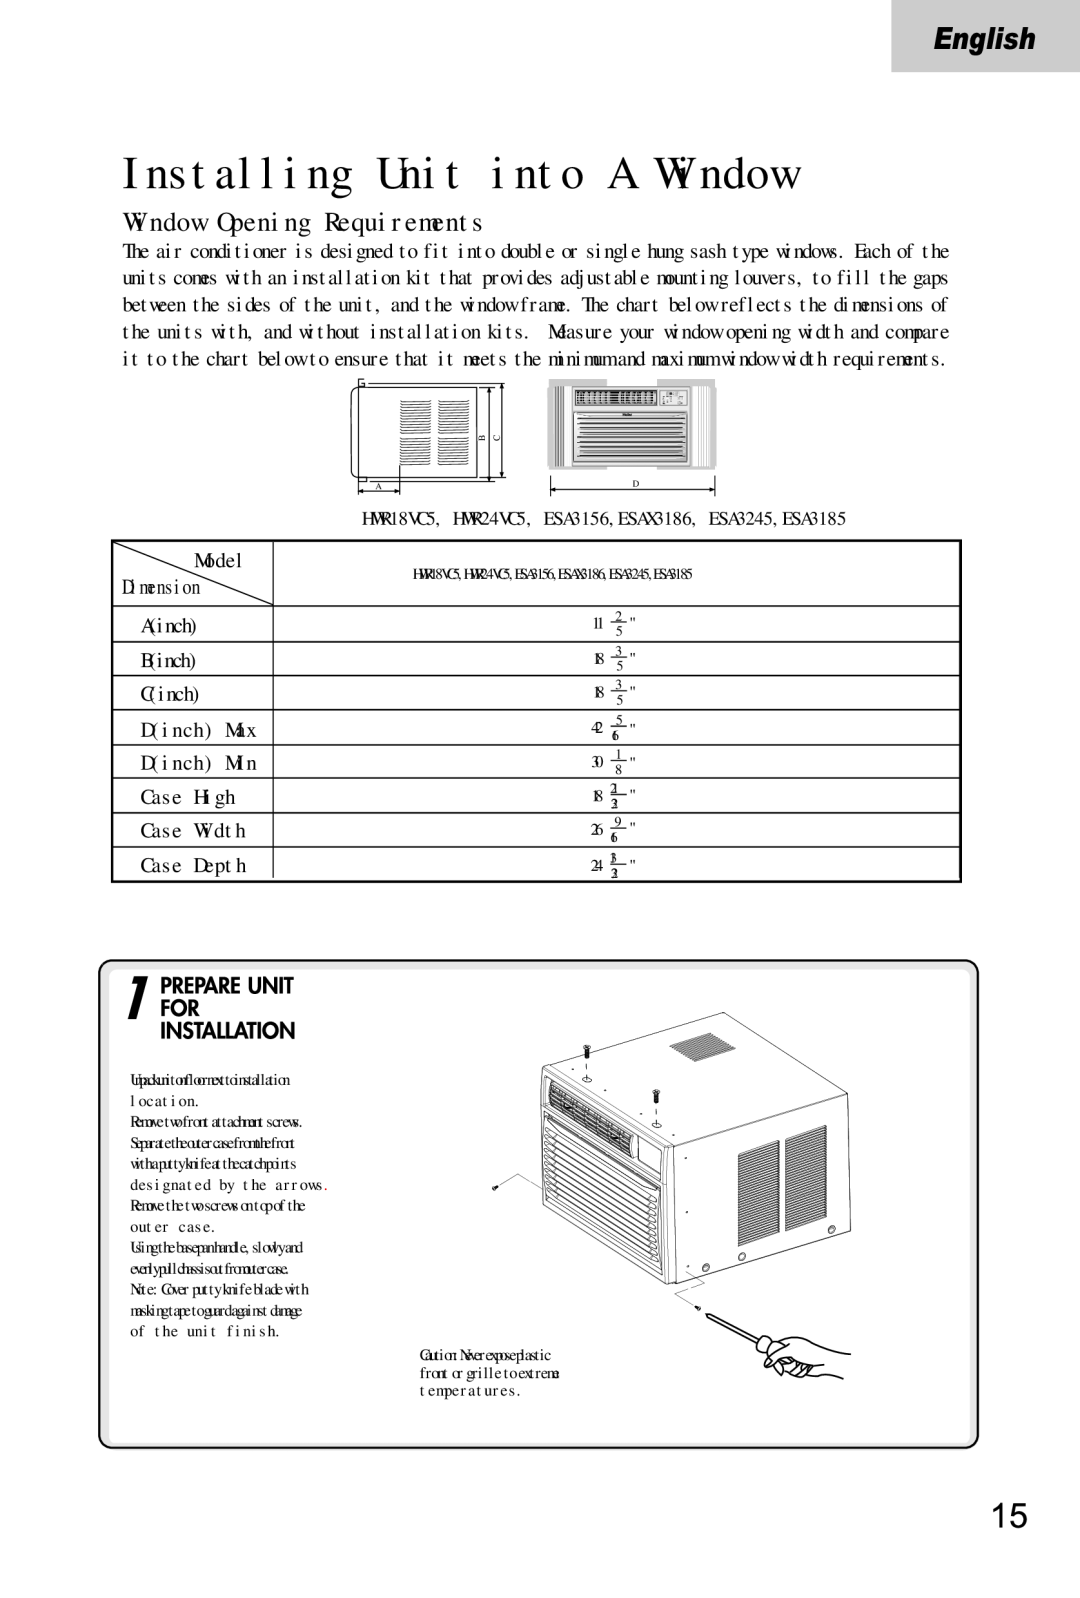 Haier HWR18VC5 manual Window Opening Requirements, Installing Unit into A Window 